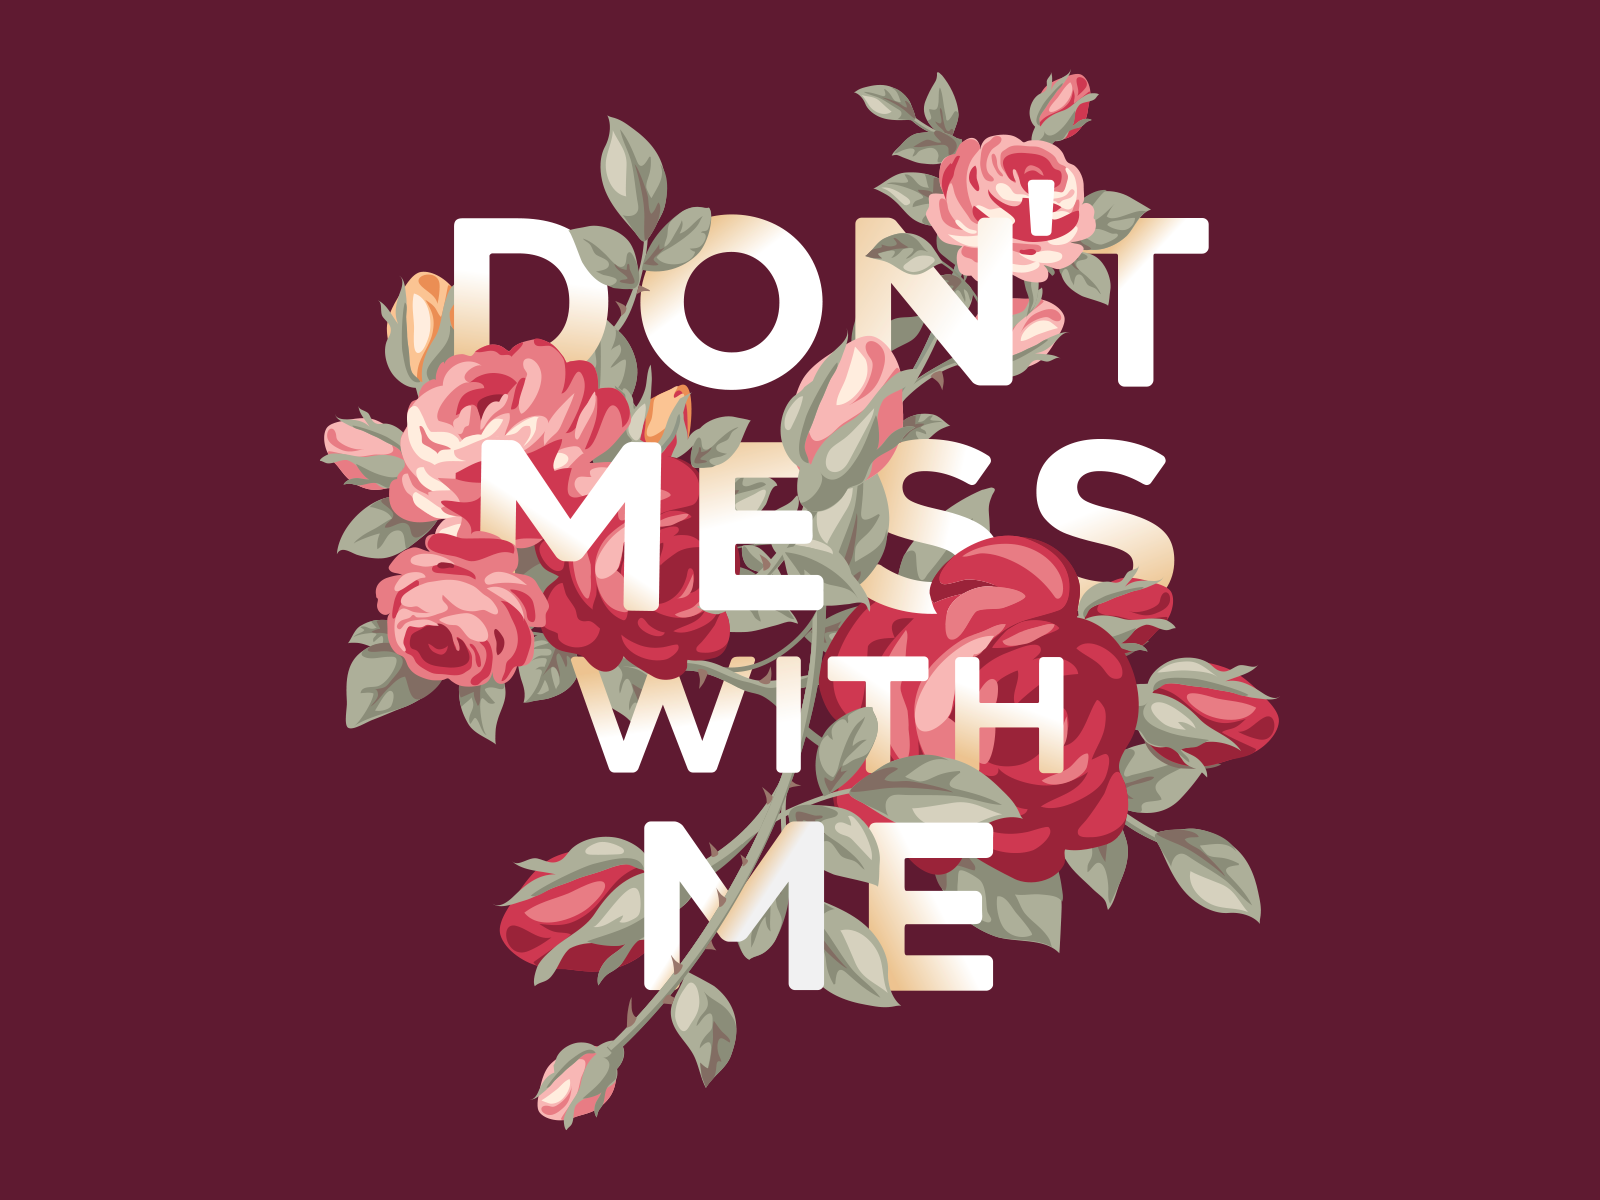 Don't Mess With Me - Color version design floral flowers hand drawn illustration jclovely roses threadless type typogaphy